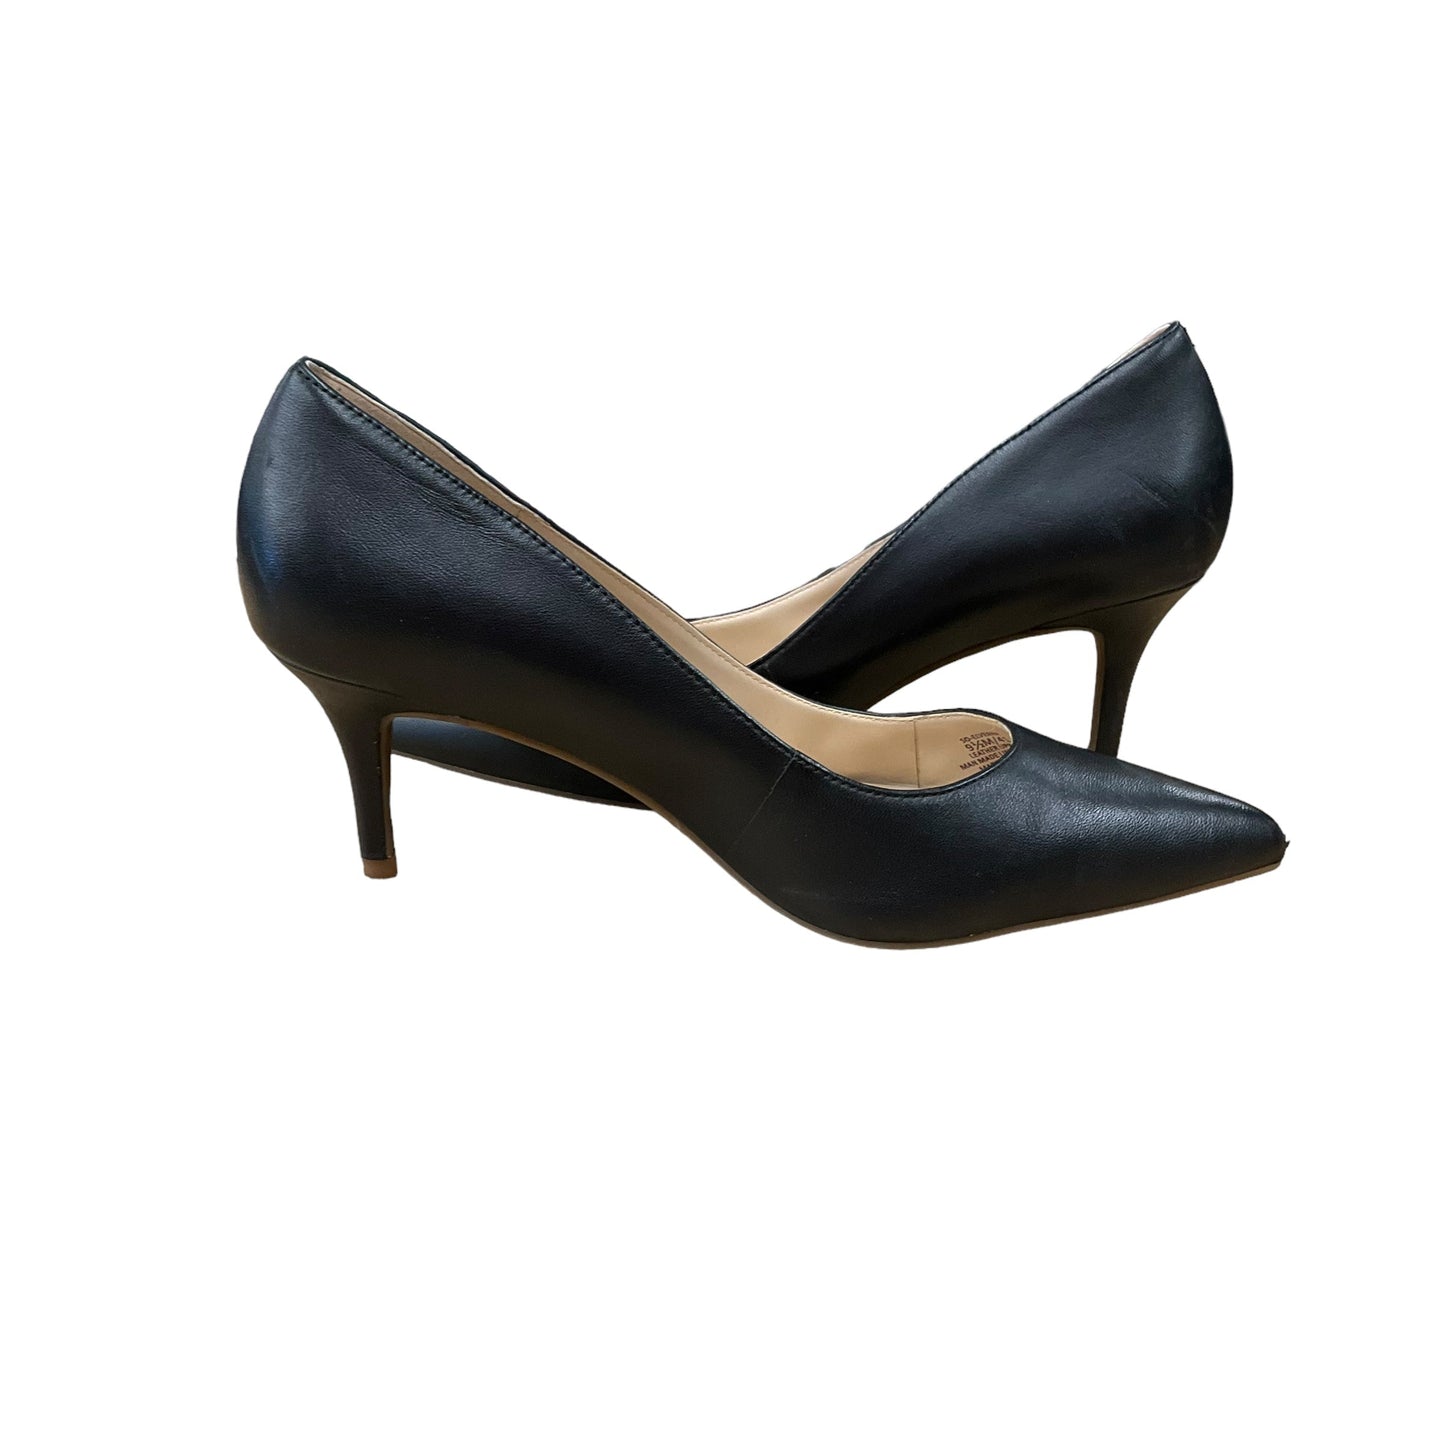 Black Shoes Heels Stiletto Sole Society, Size 9.5